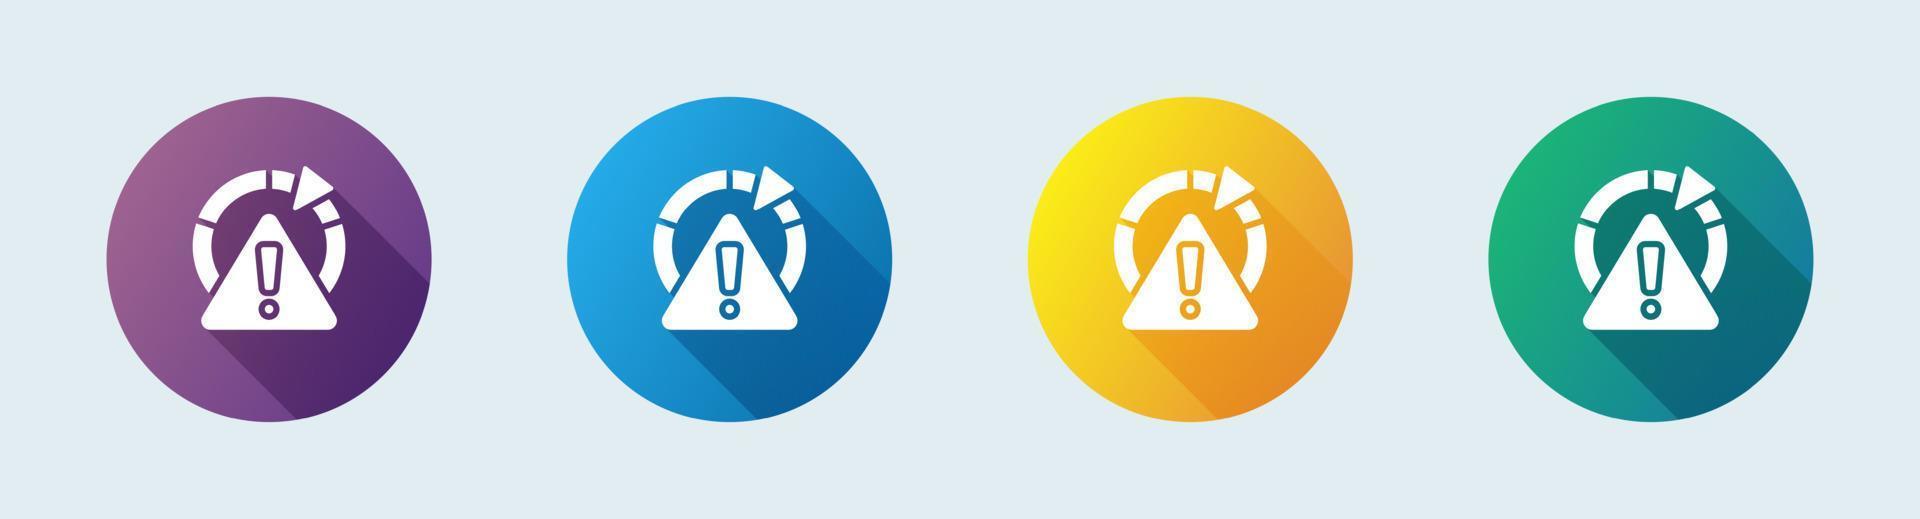 Risk solid icon in flat design style. Exclamation signs vector illustration.